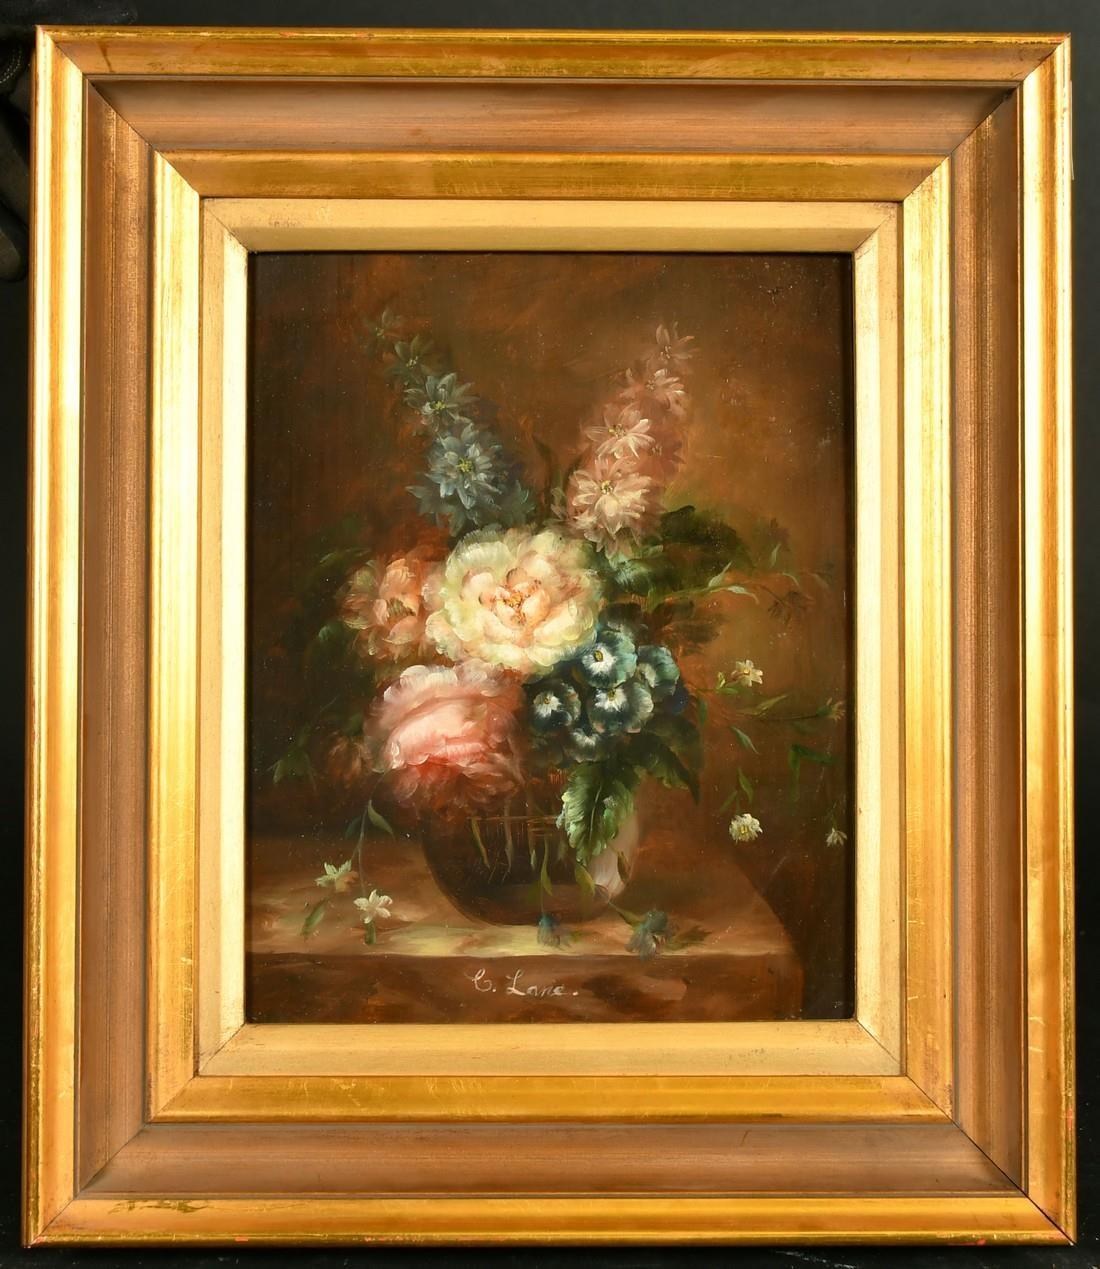 C. Lane Still-Life Painting - Classical Floral Still Life Painting of Mixed Pale Flowers in Vase